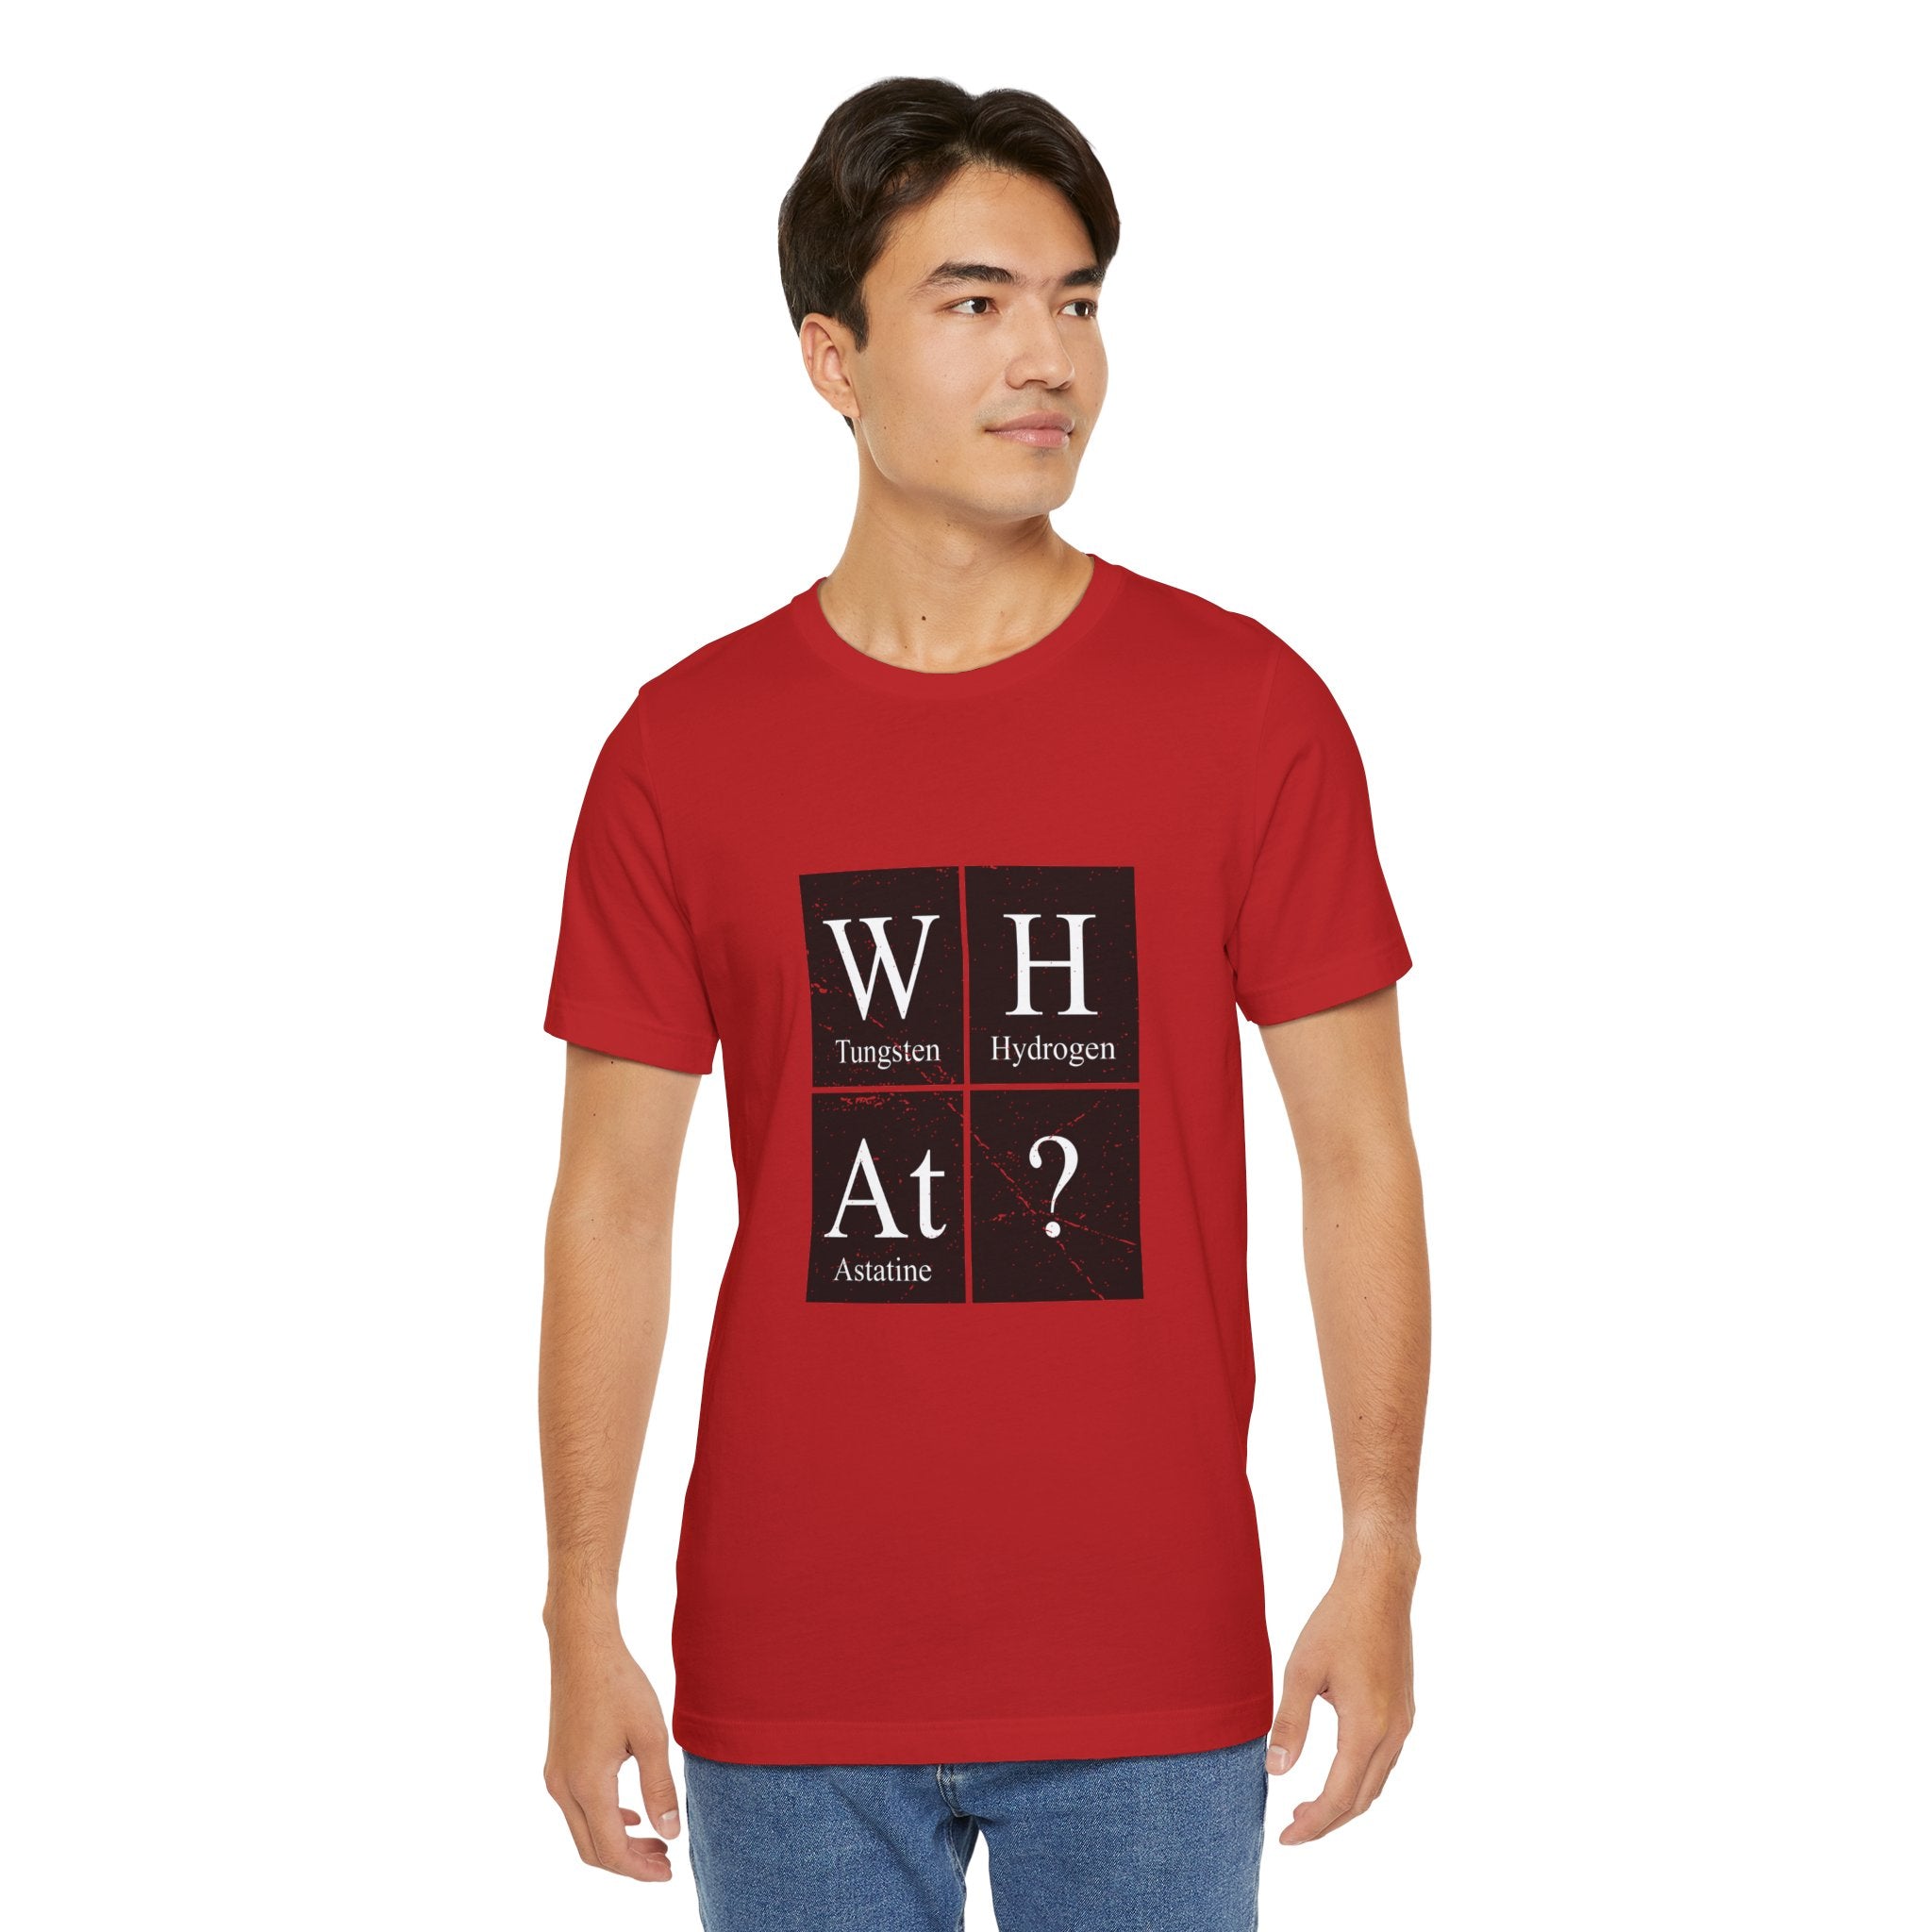 Young man wearing a red unisex jersey tee with the W-H-At-? design that spells "what?" with tungsten, hydrogen, and astatine symbols.